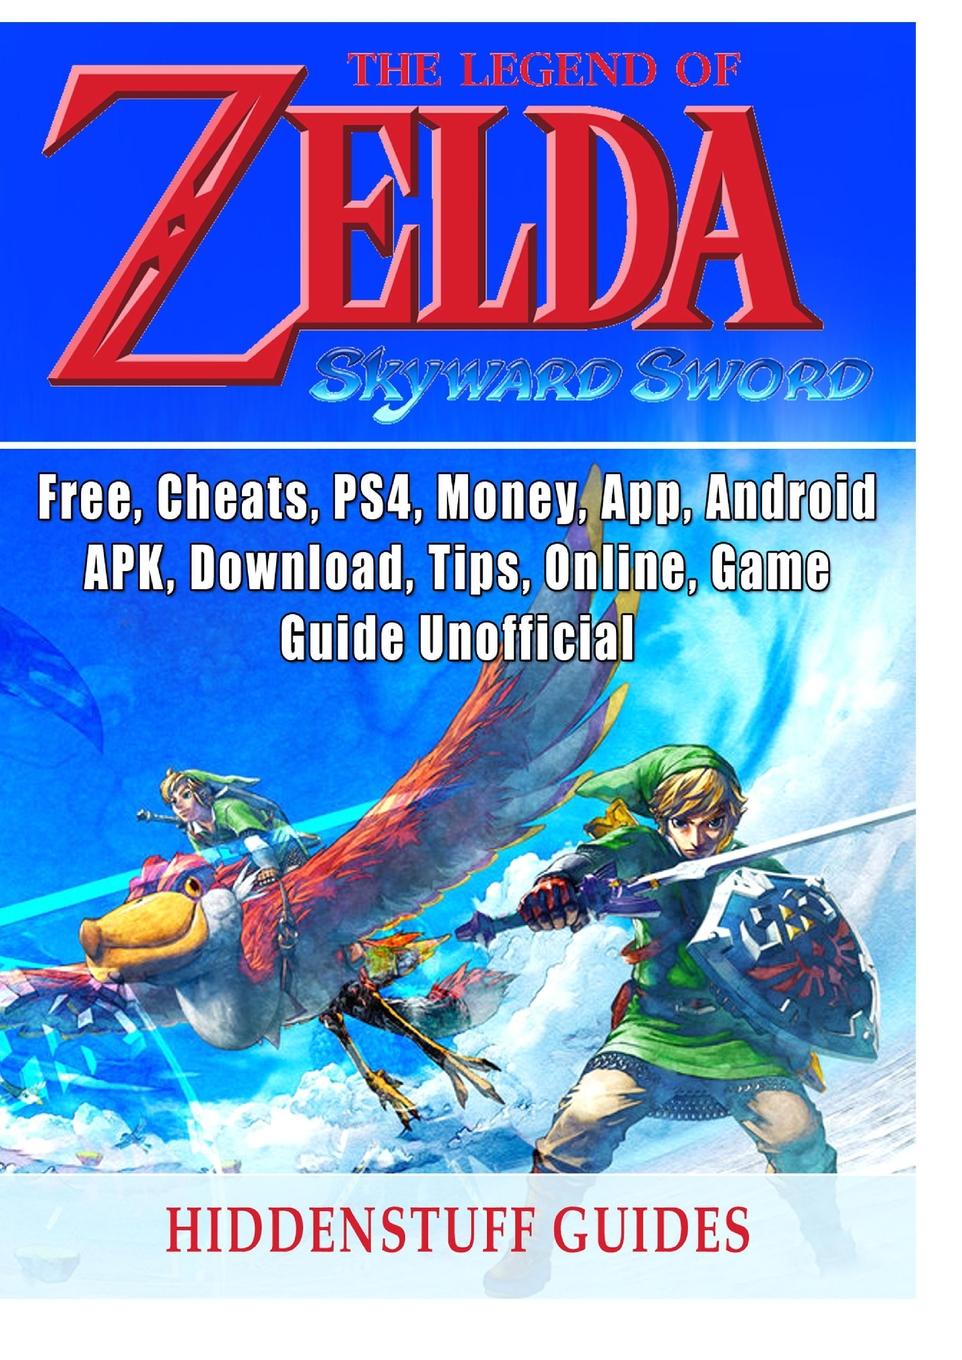 фото Legend of Zelda Skyward Sword, Switch, Wii, Walkthrough, Characters, Bosses, Amiibo, Items, Tips, Cheats, Game Guide Unofficial